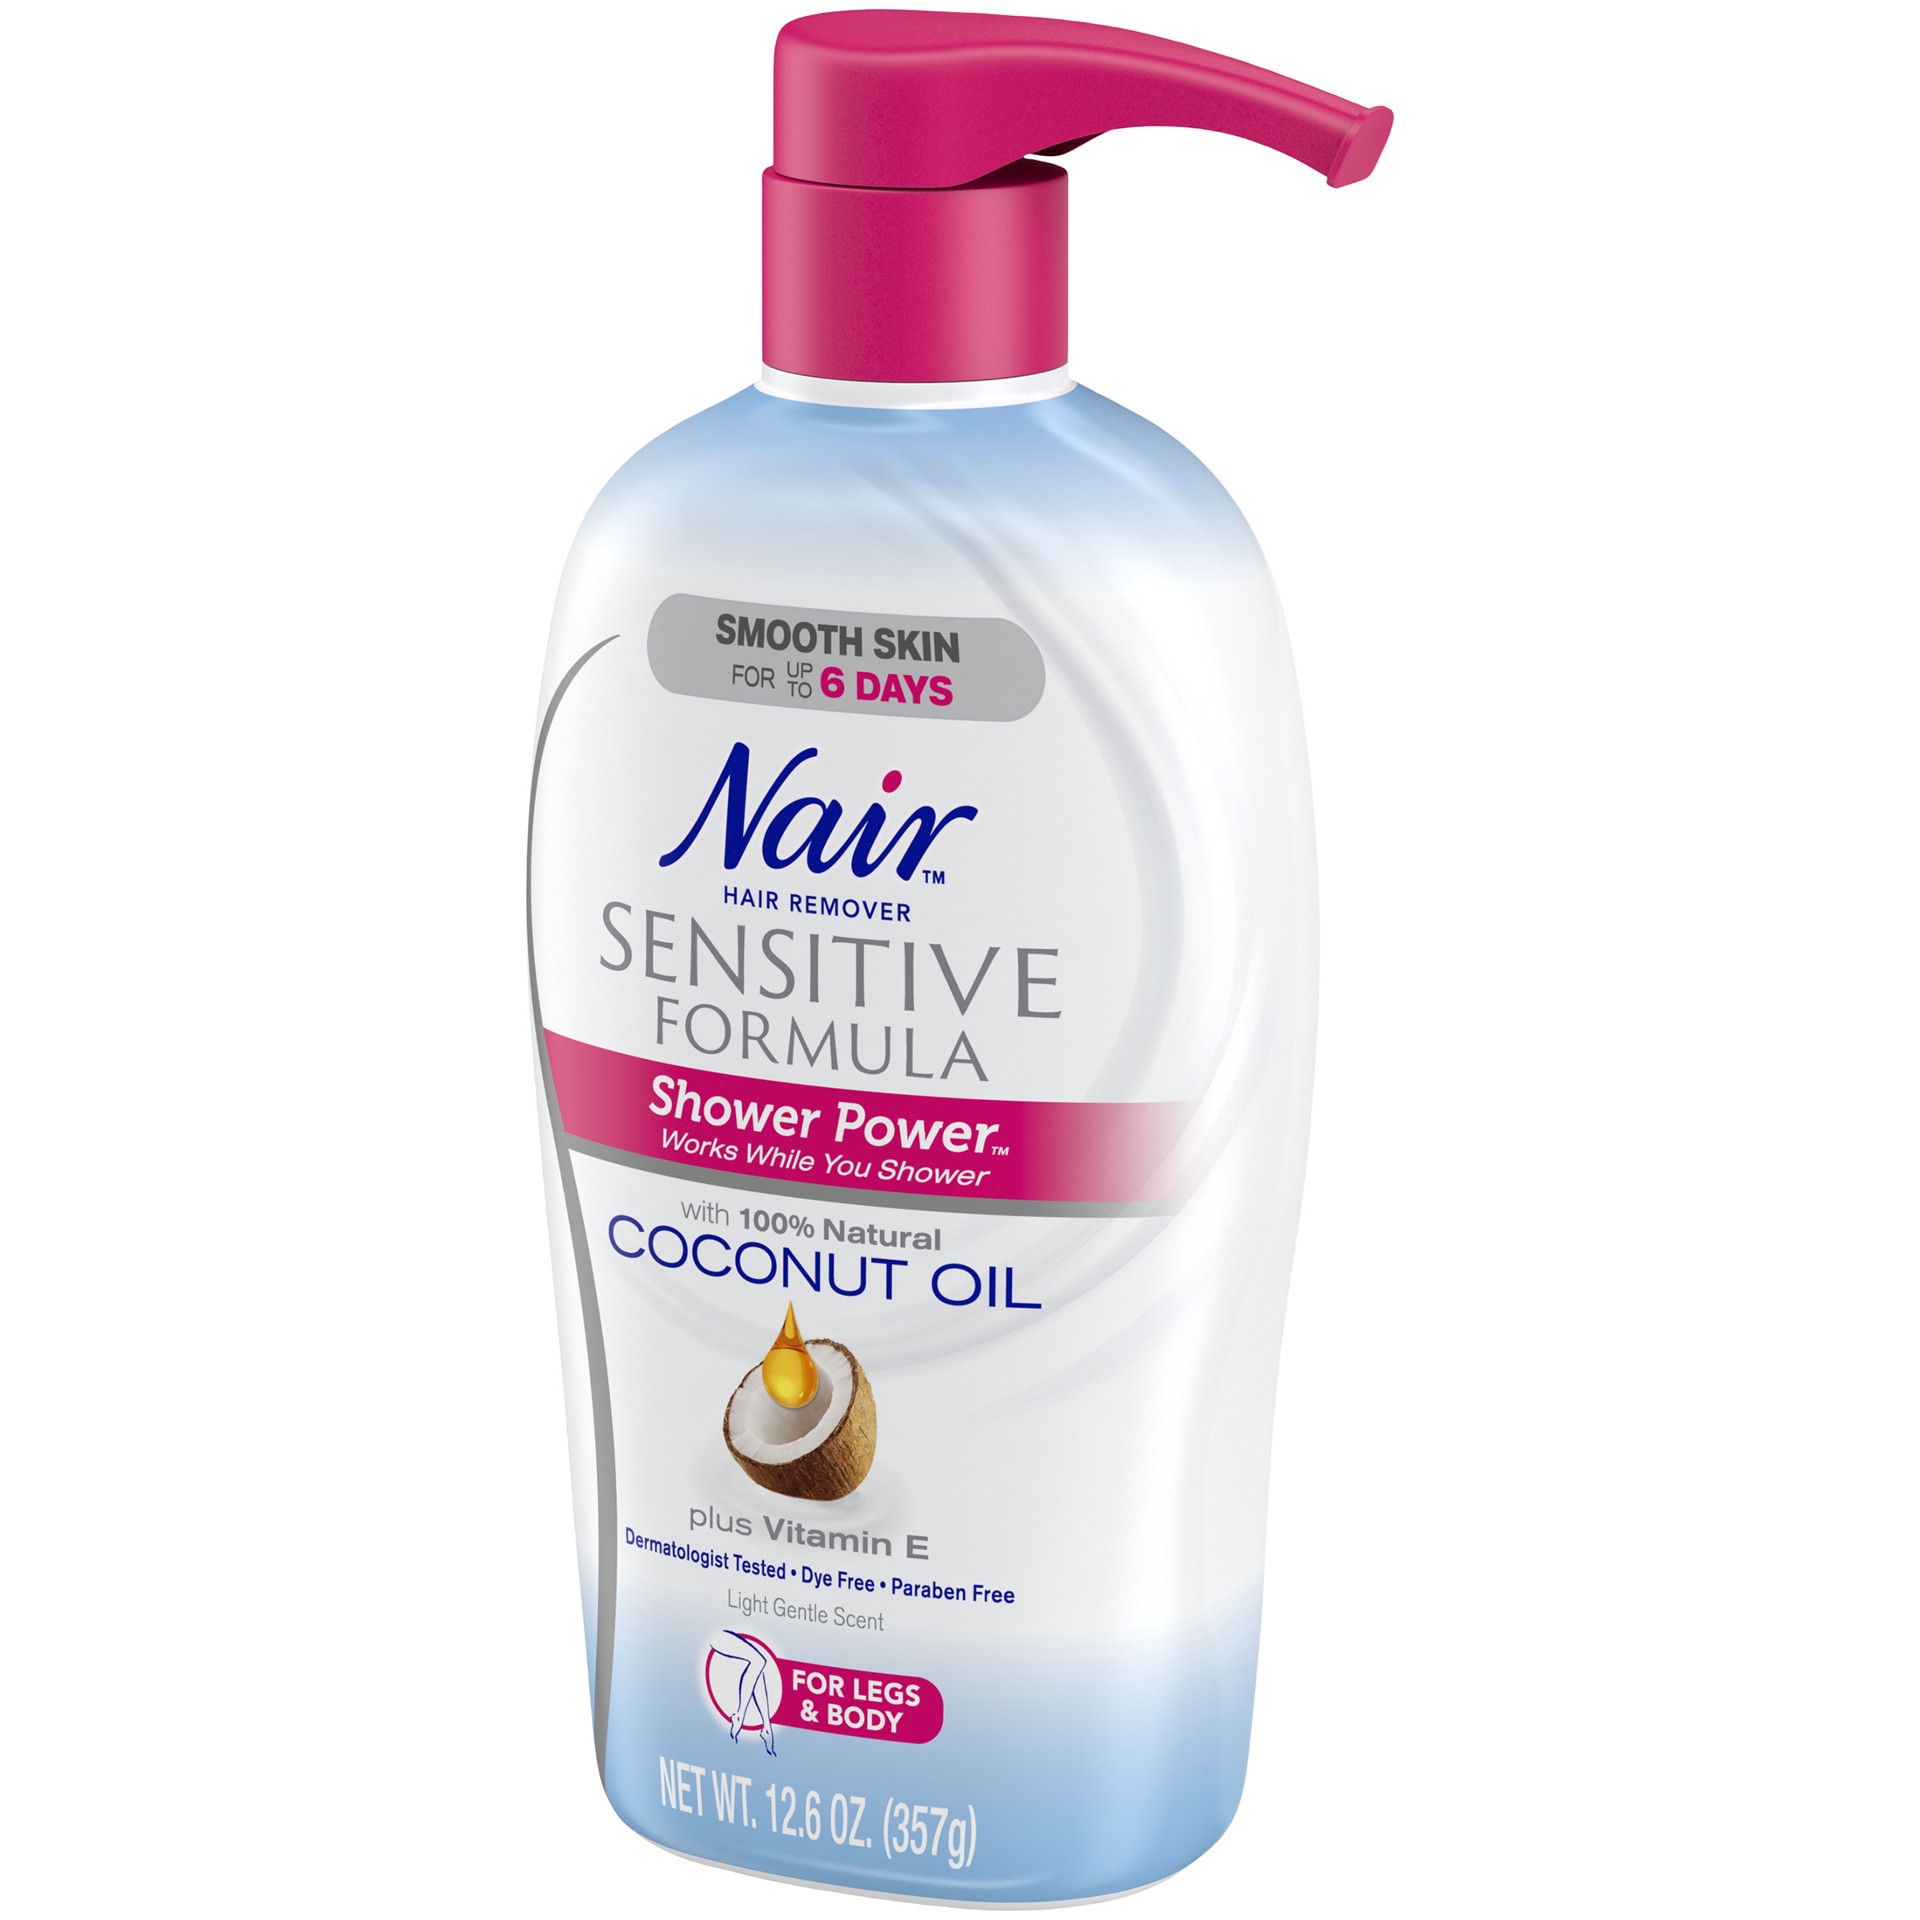 slide 2 of 4, Nair Hair Remover Sensitive Formula Shower Power with Coconut Oil and Vitamin E, 12.6oz, 12.6 oz